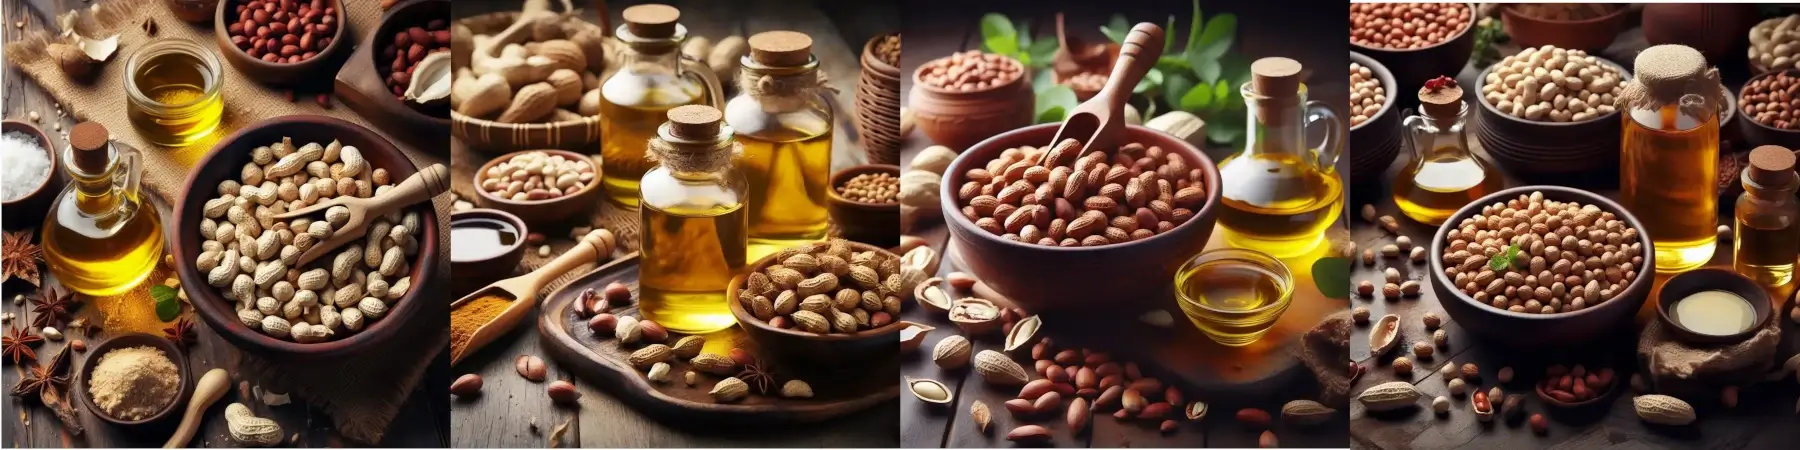 Natural Healthy Organic Groundnut oil